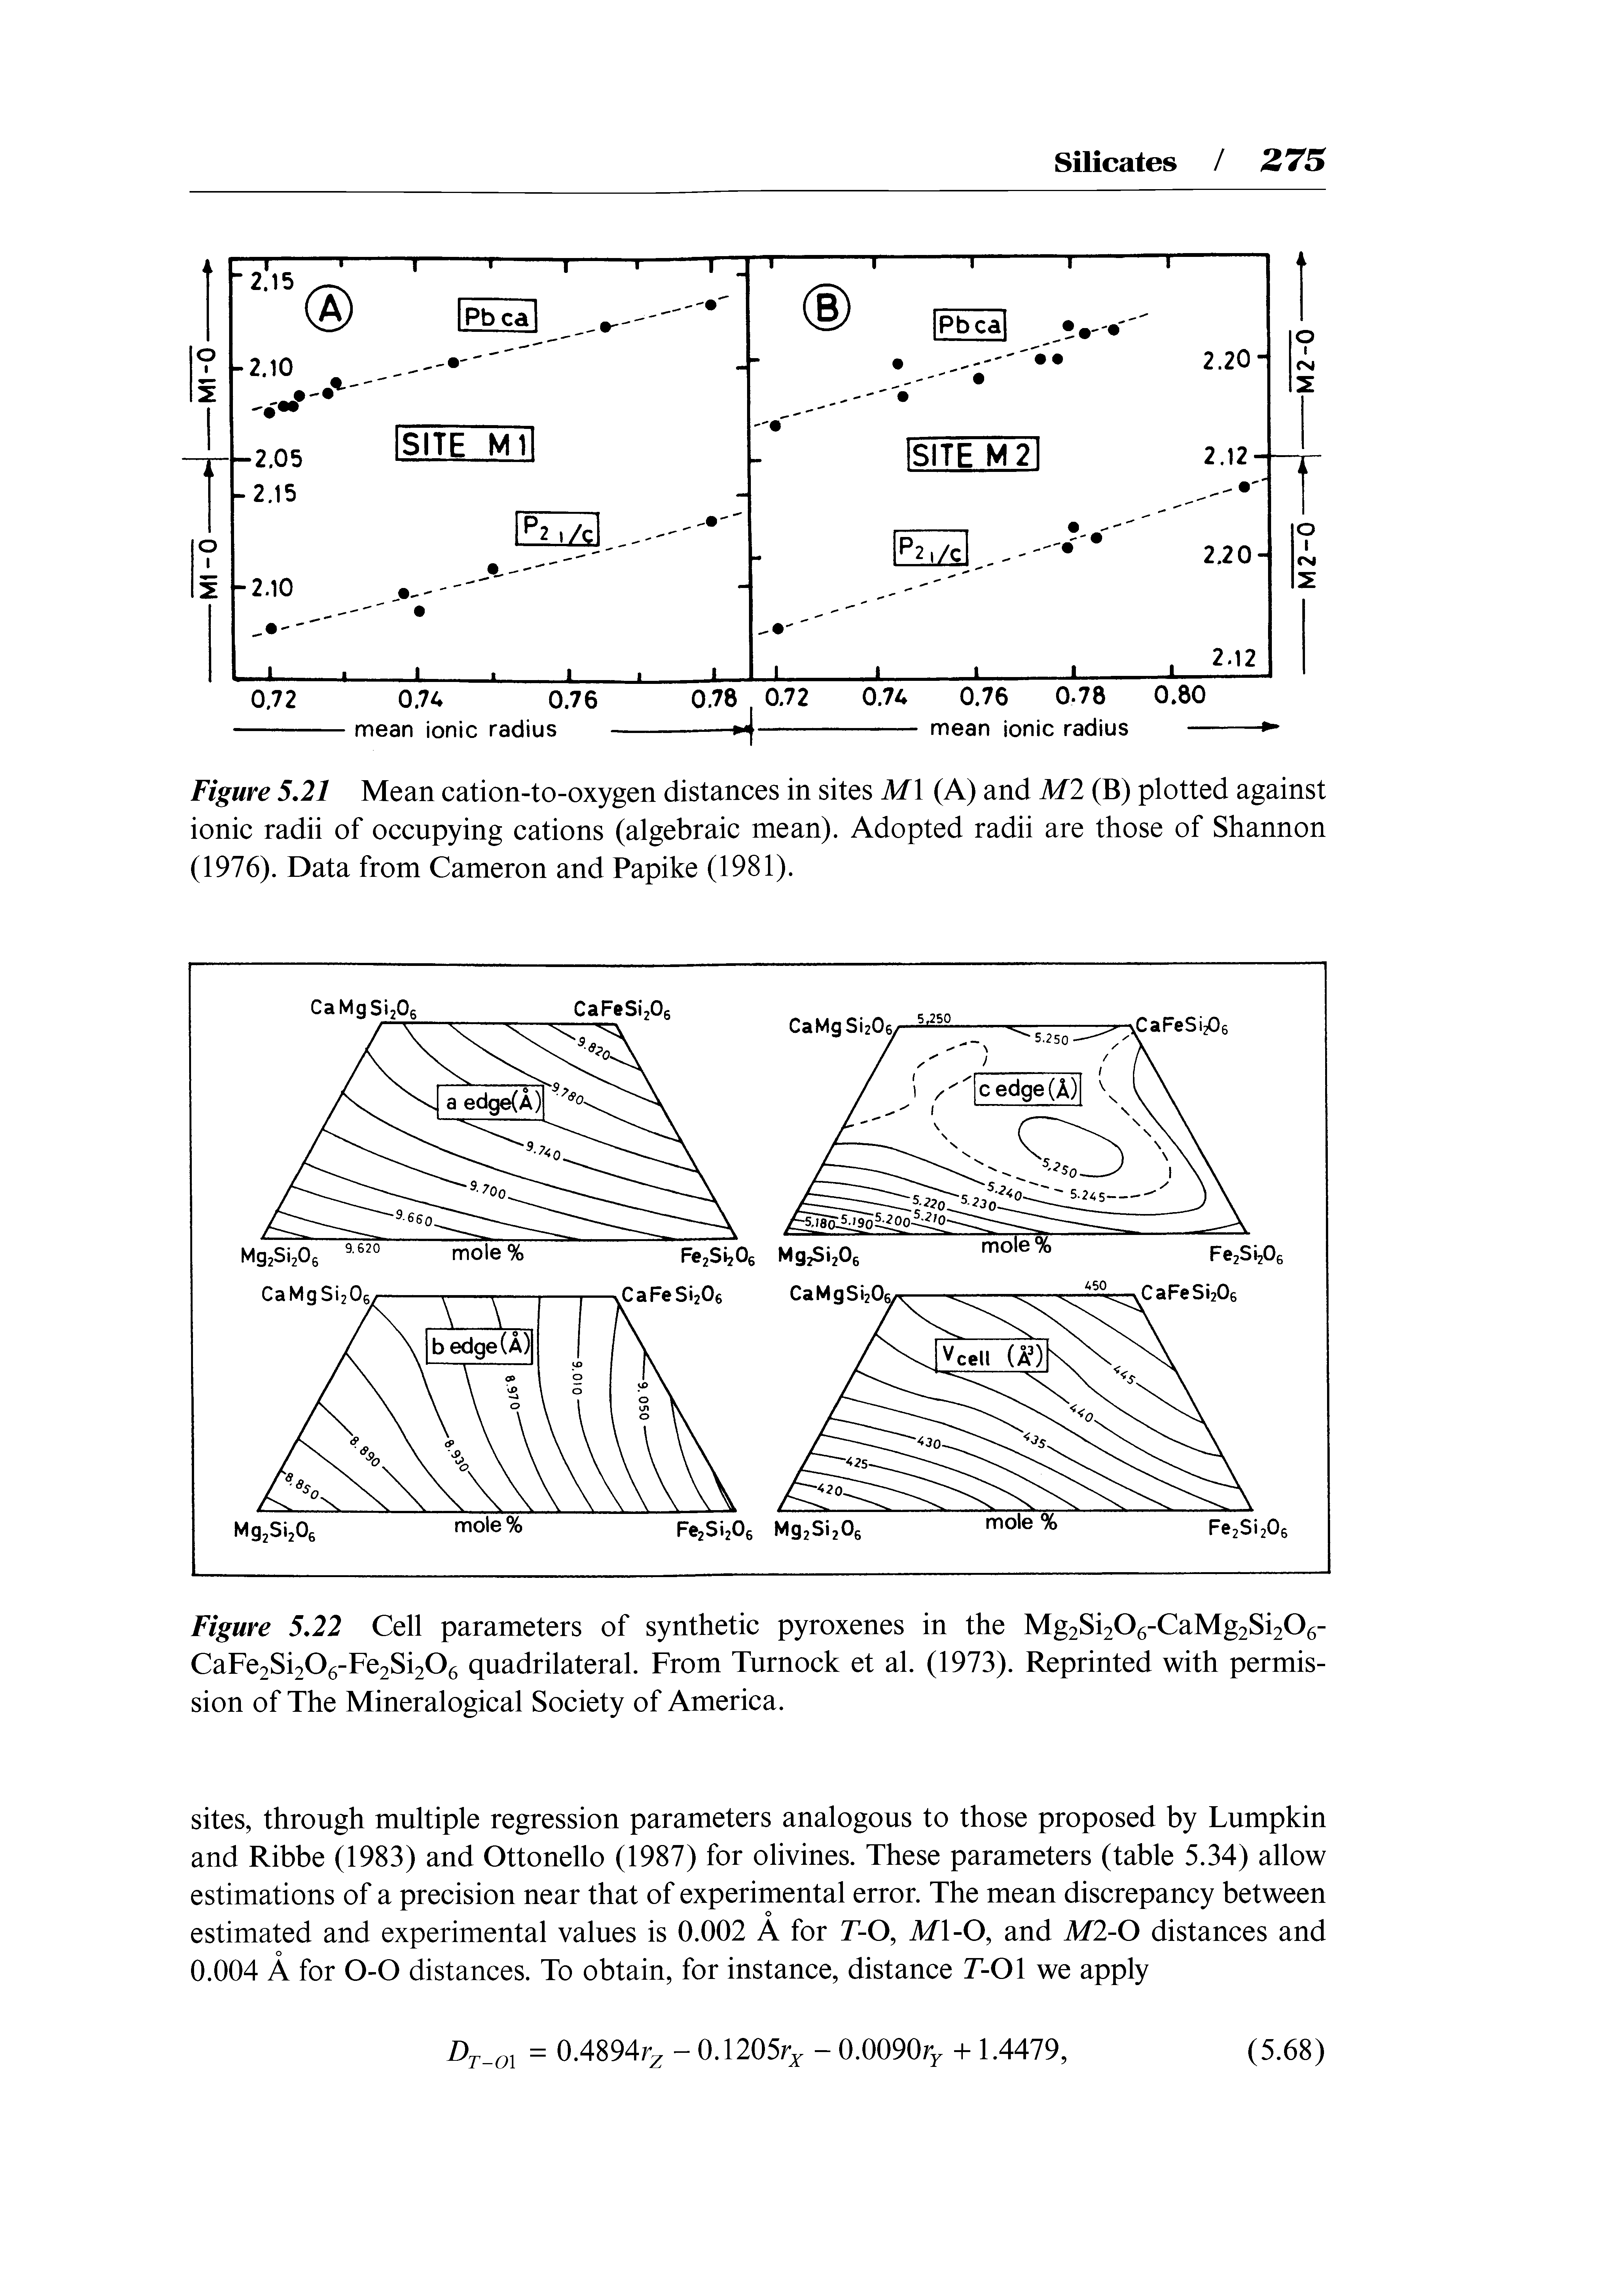 Figure 5.22 Cell parameters of synthetic pyroxenes in the Mg2Si206-CaMg2Si206-CaFe2Si206-Fe2Si206 quadrilateral. From Turnock et al. (1973). Reprinted with permission of The Mineralogical Society of America.